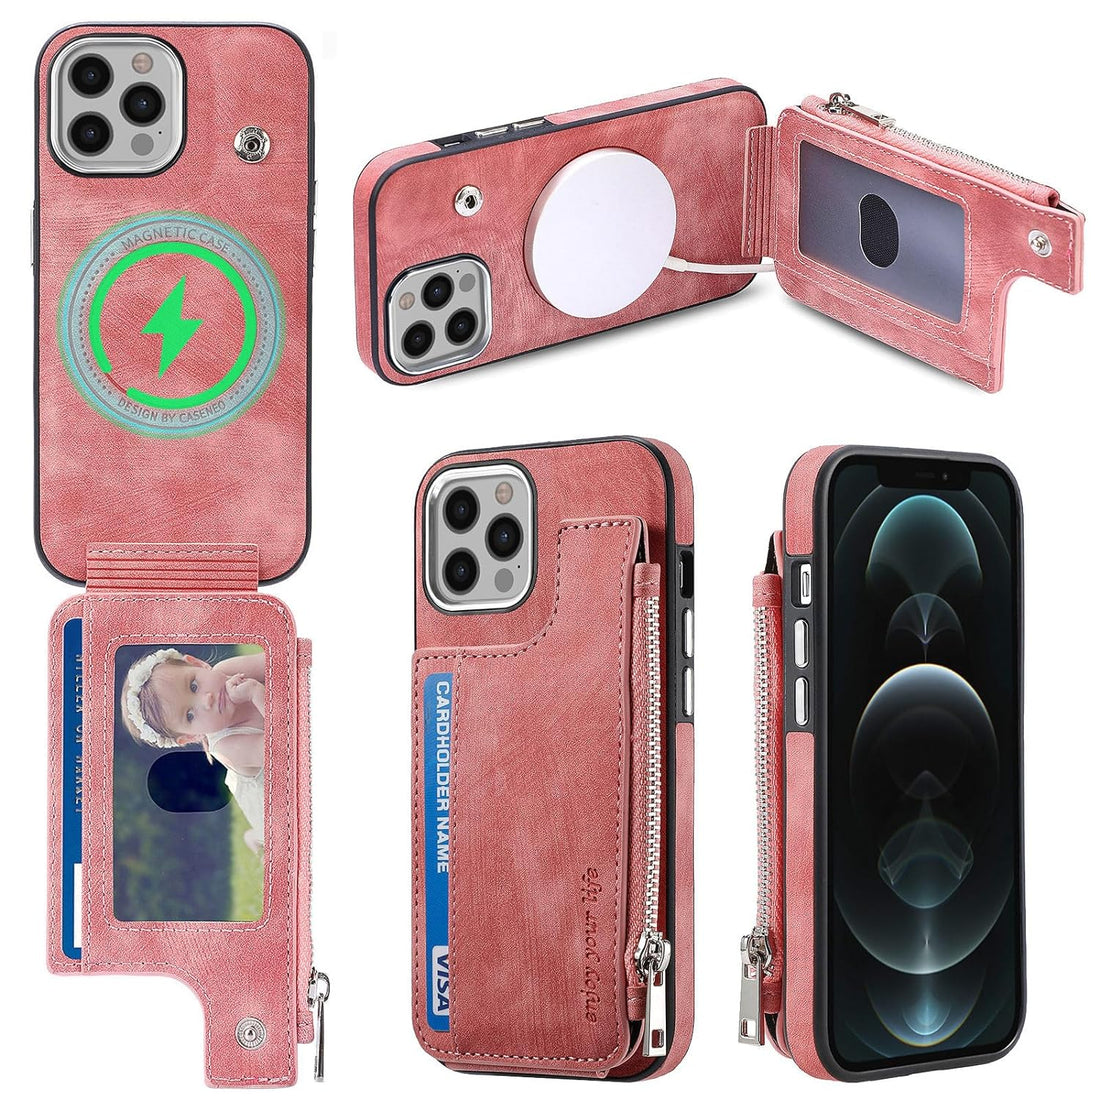 Furiet Wallet Case for iPhone 12 Pro iPhone12 6.1 with MagSafe Magnetic RFID Blocking and Credit Card Holder Kickstand Wireless Charging Leather Zipper Phone Cover for iPhone12pro 5G i 12s 12pro Pink